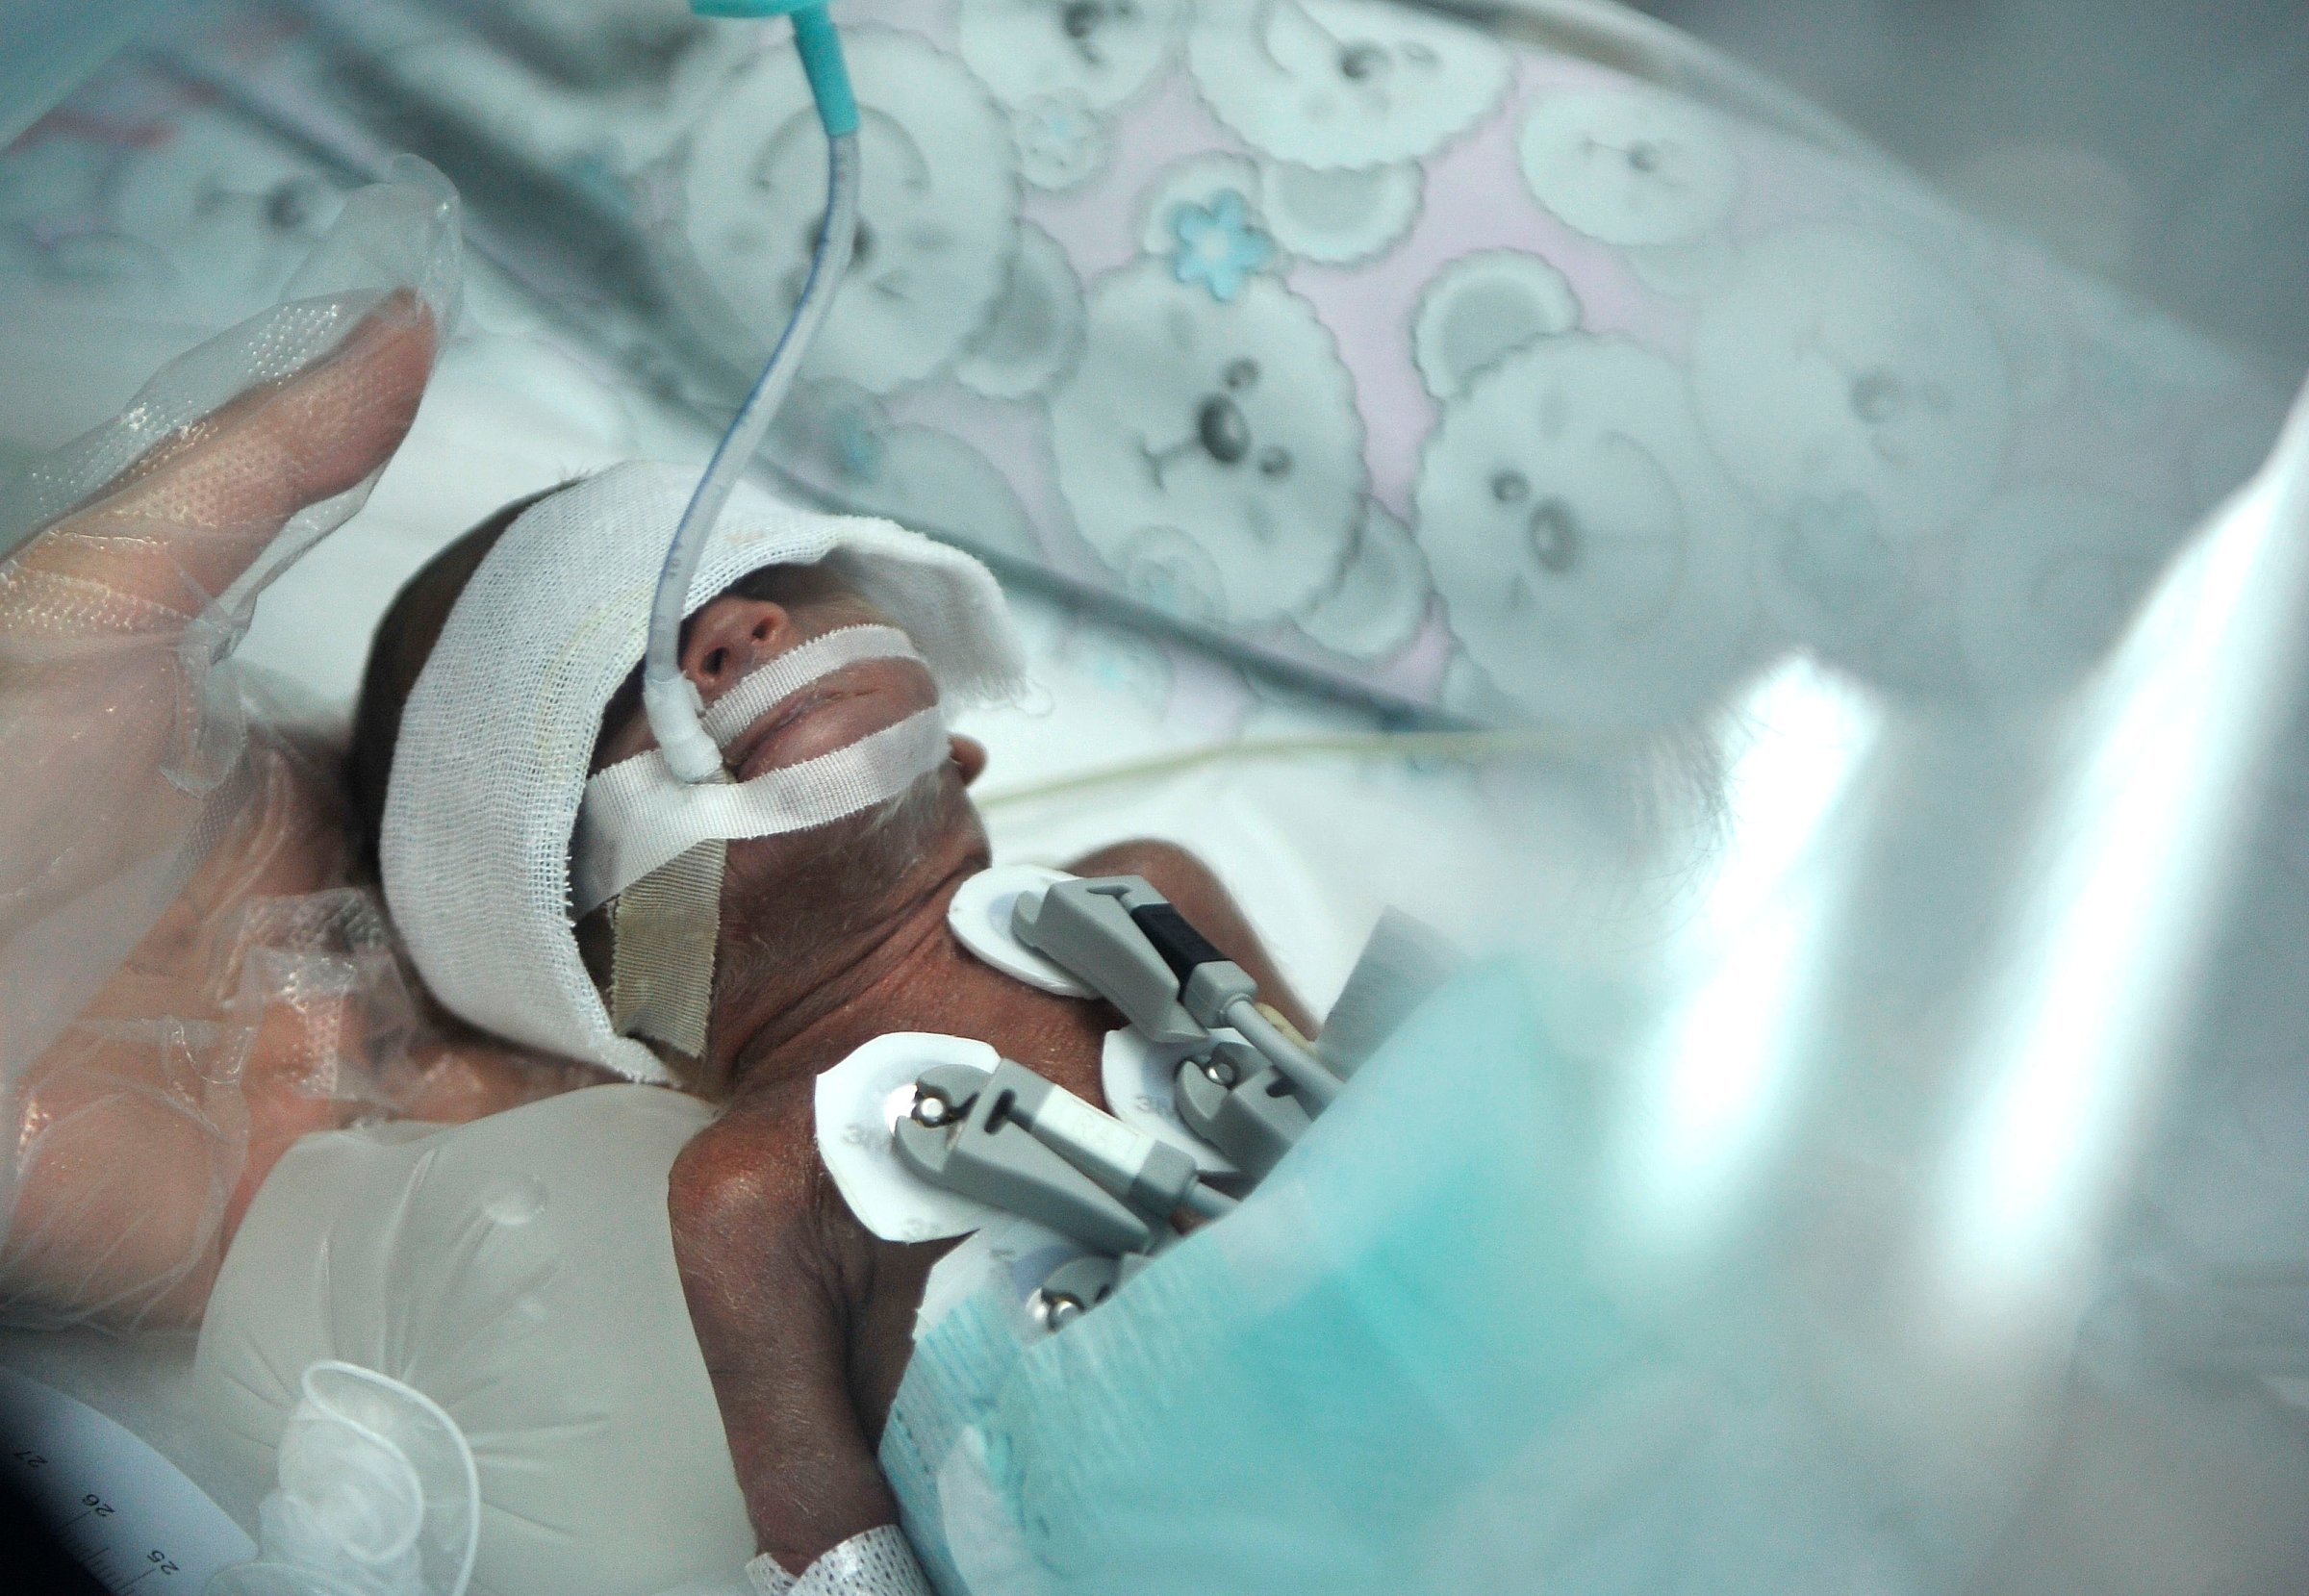 A pound and a half of life: This baby was born in 2014 at 23 weeks in Sichuan China.